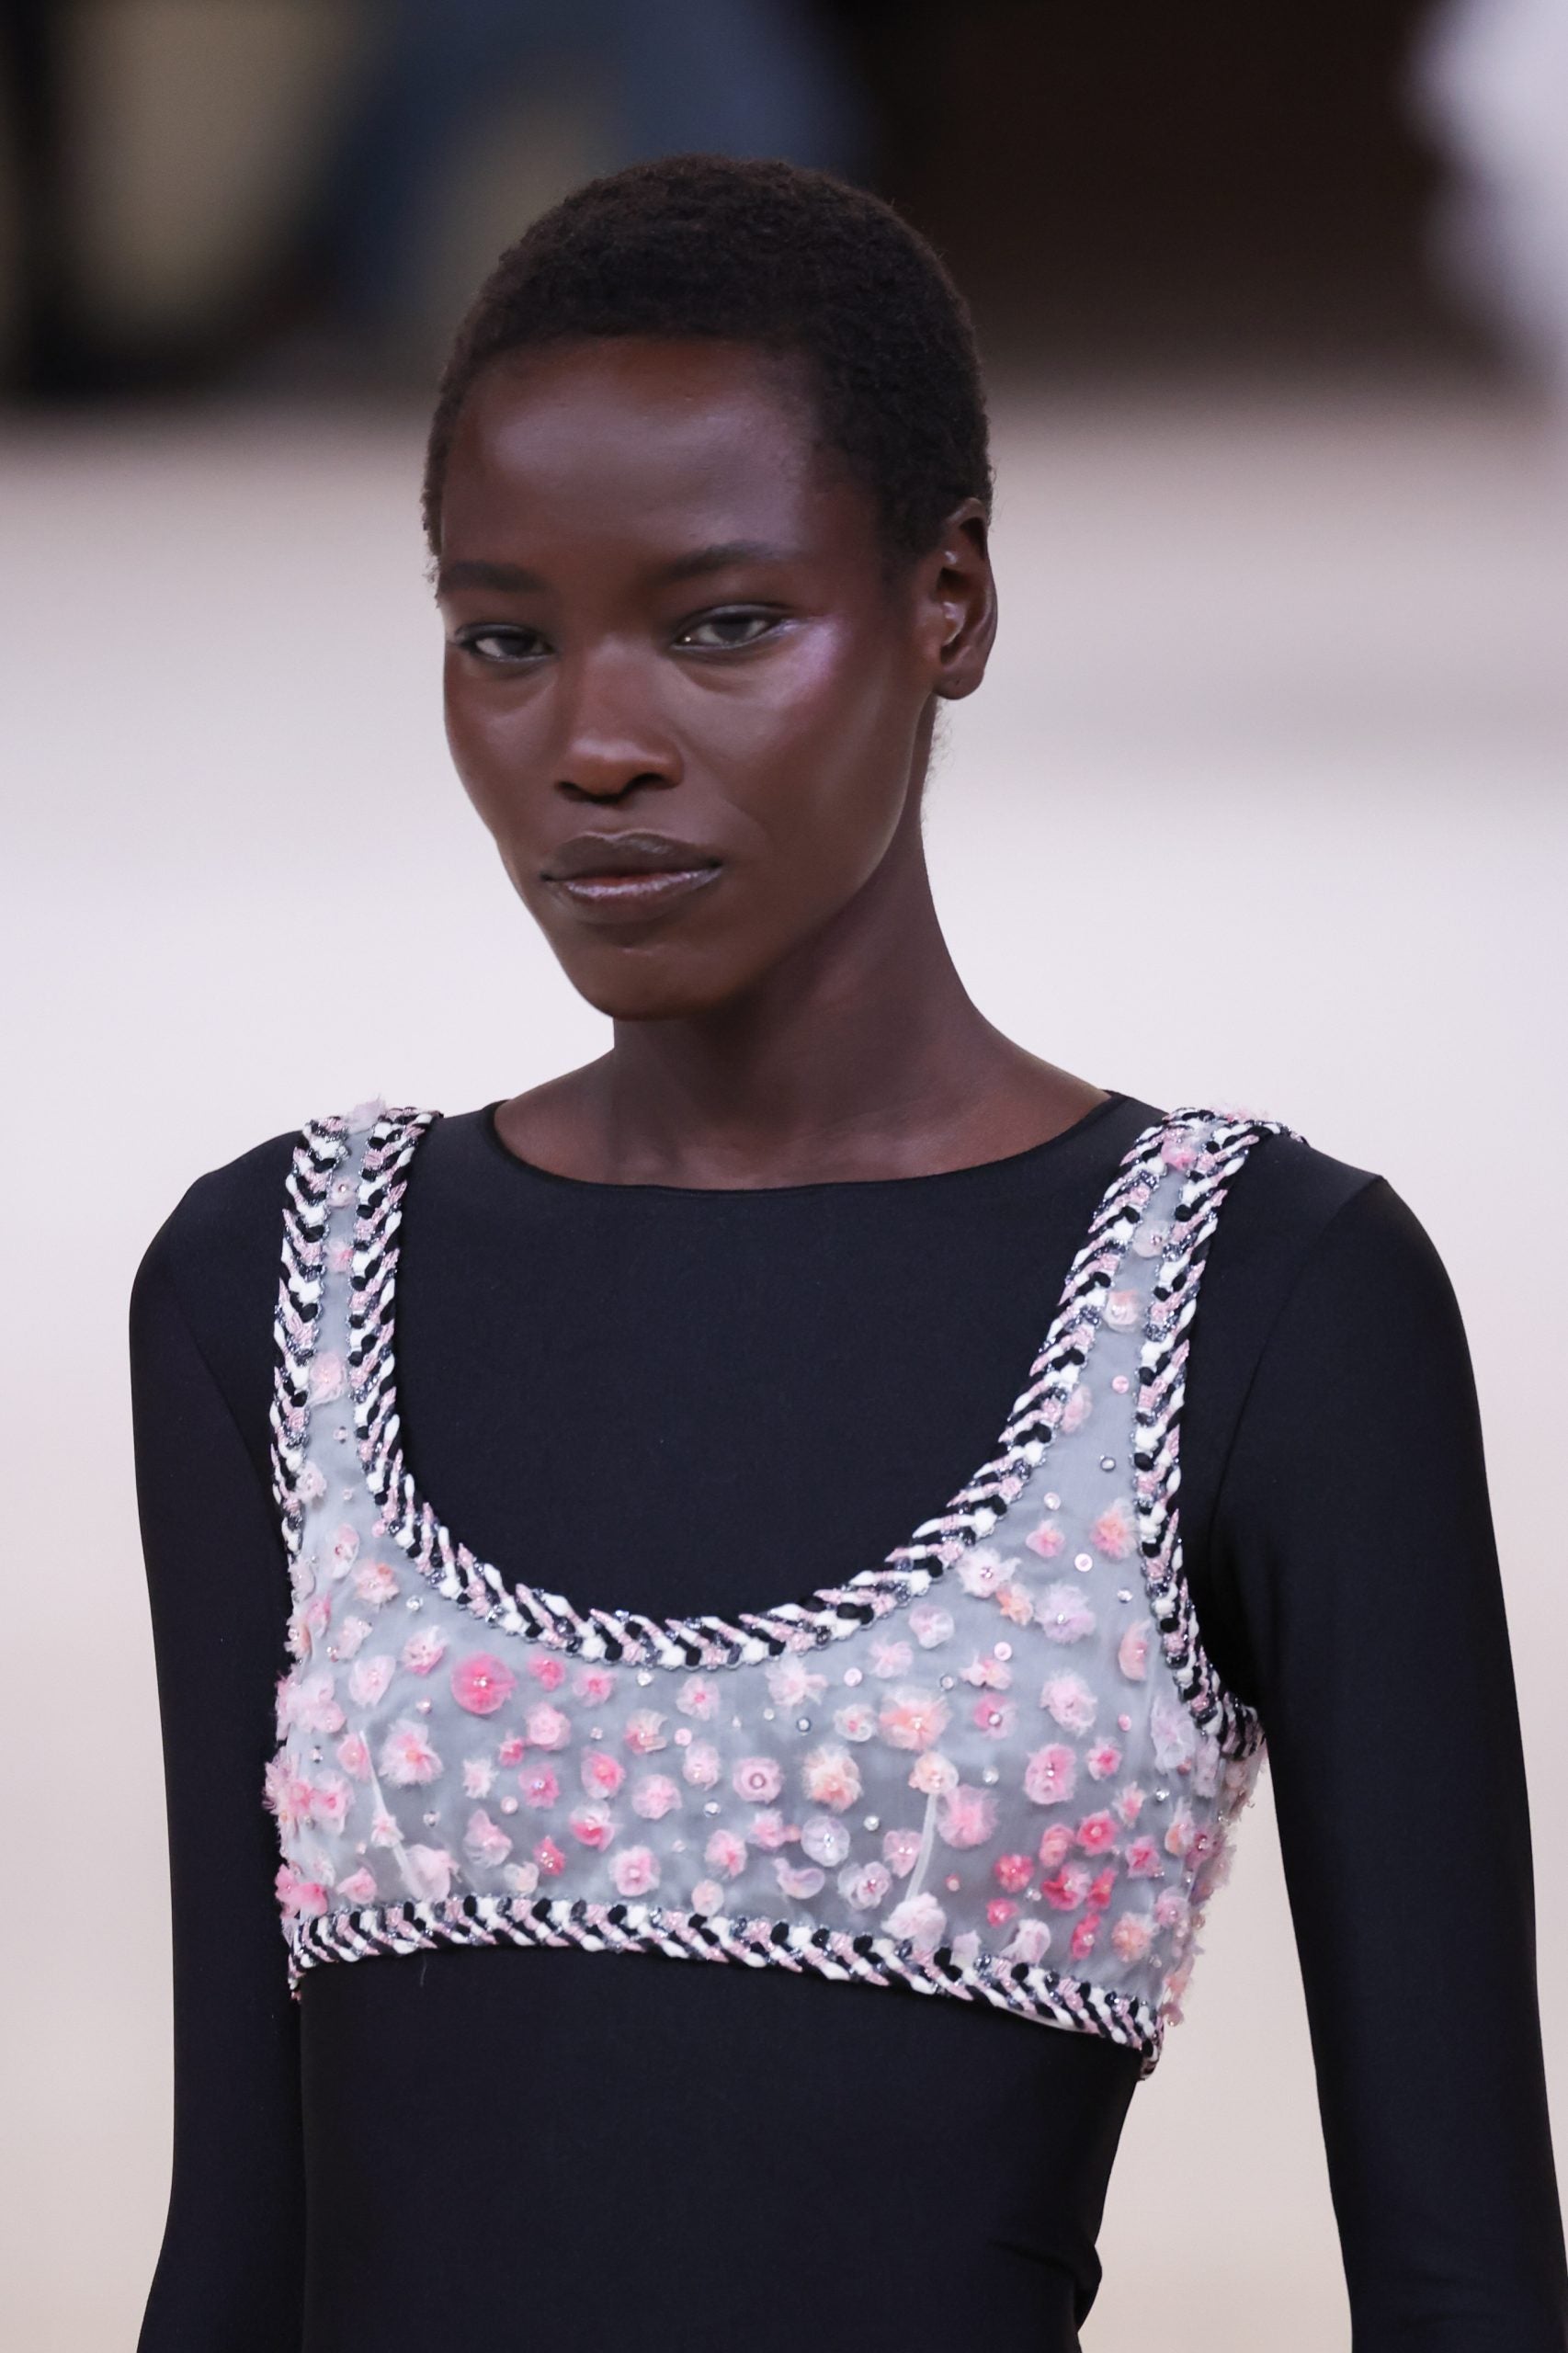 Chanel’s Couture Show Celebrated The Beauty In Imperfection